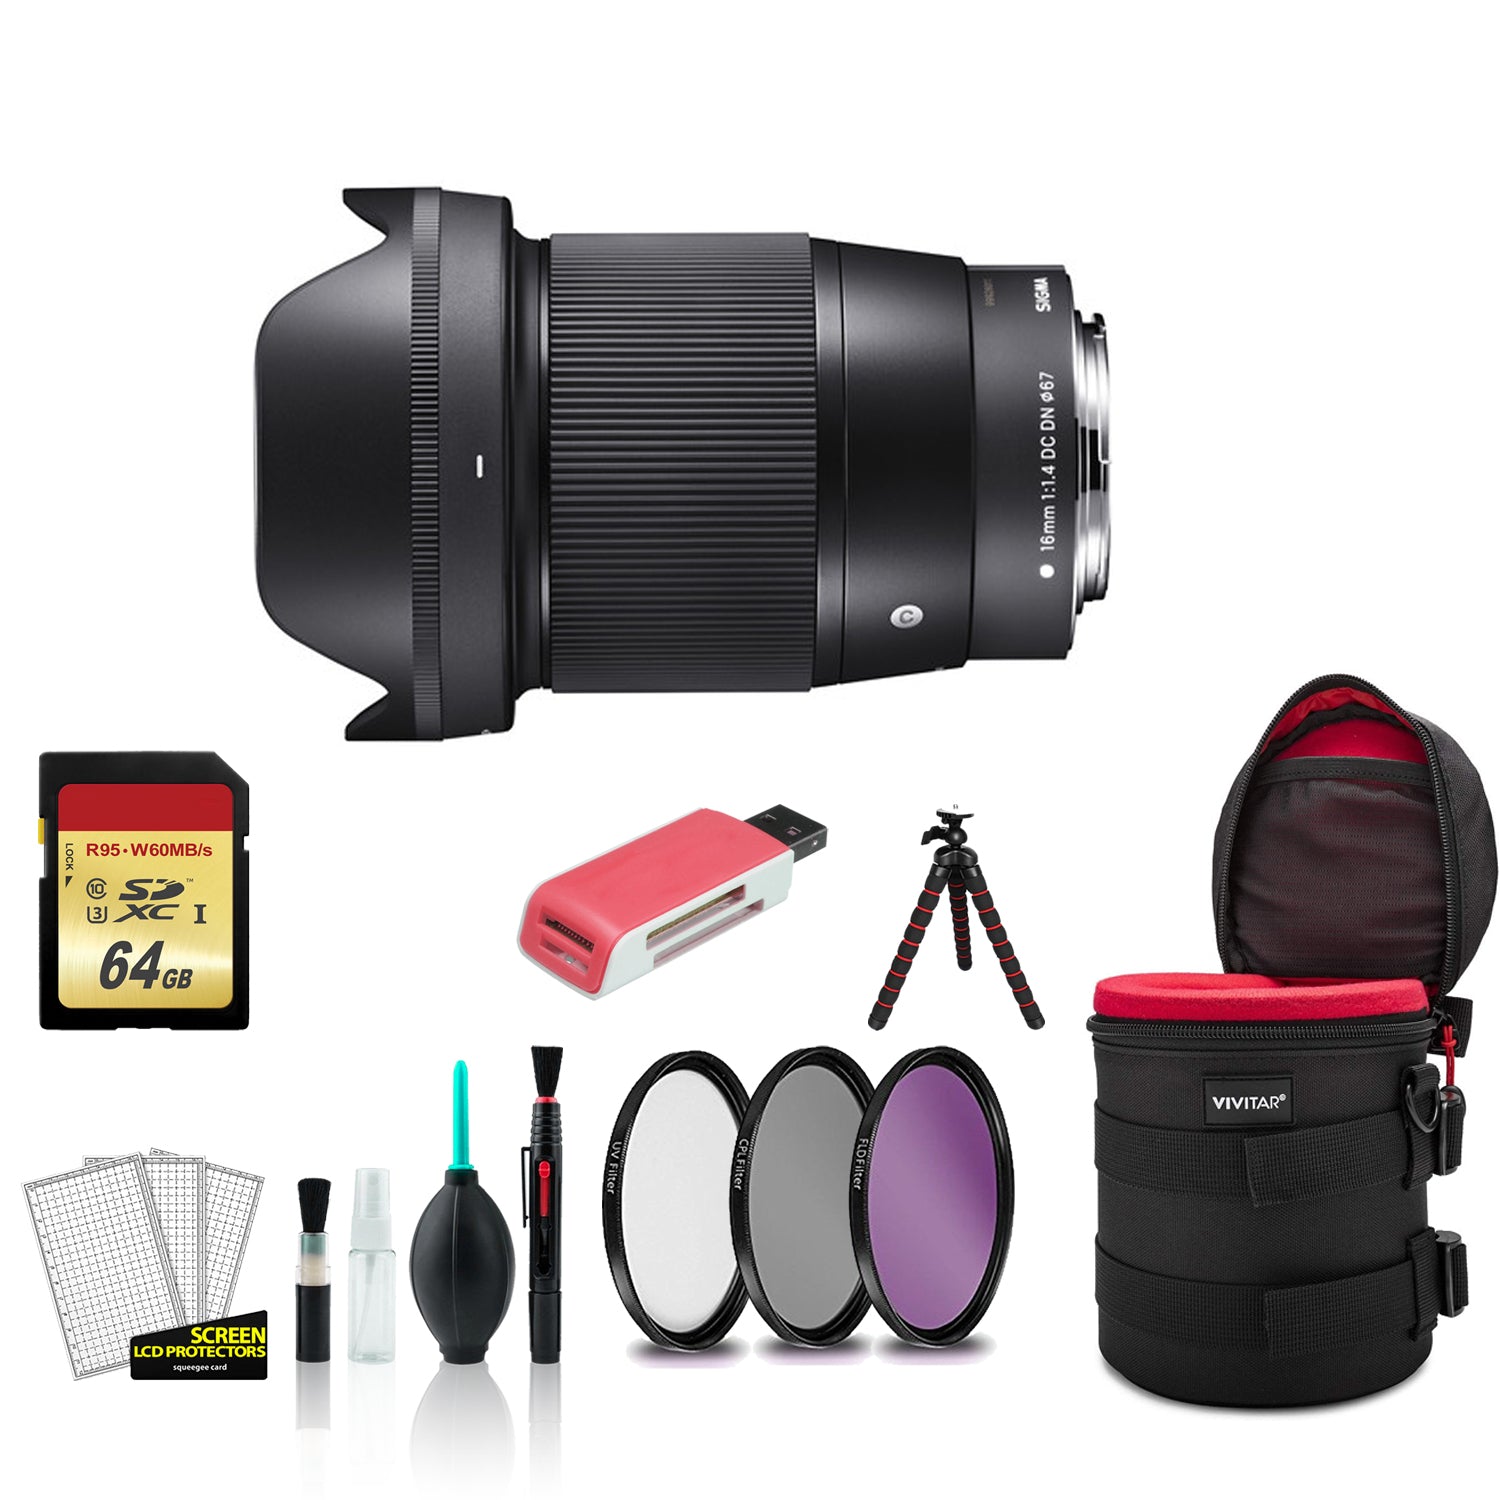 Sigma 16mm Contemporary Lens f/1.4 DC DN for Micro Four Thirds 402963 with Filter Kit + 64GB Memory Card Bundle